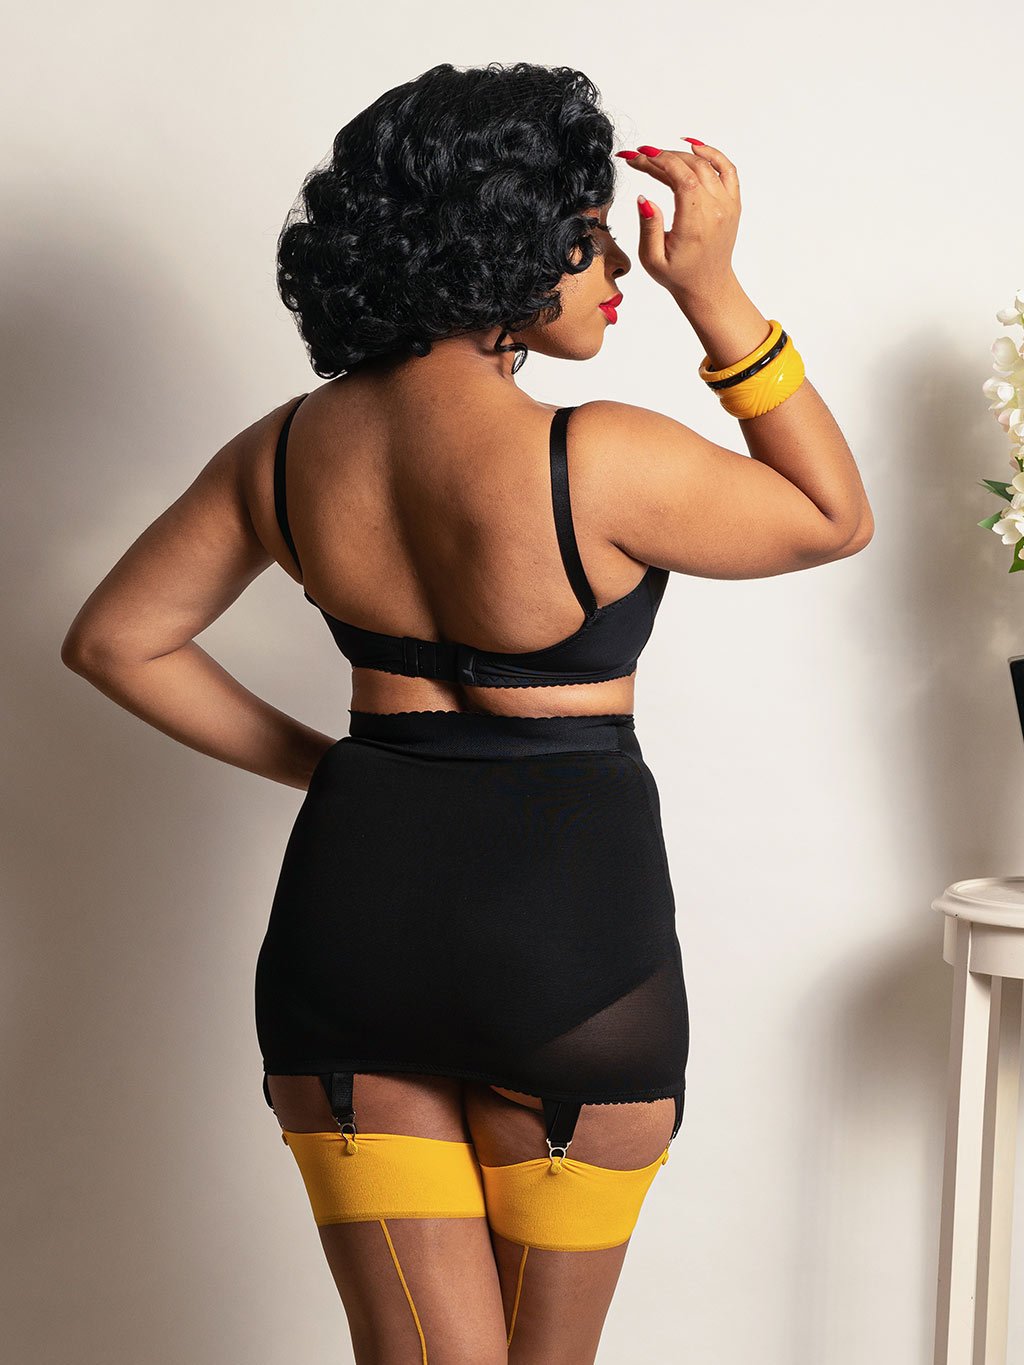 Trixie Firm Control Girdle in black powermesh. A roll on girdle that provides firm control and smoothing under clothing. 6 fixed suspender clips to keep your stockings in place.